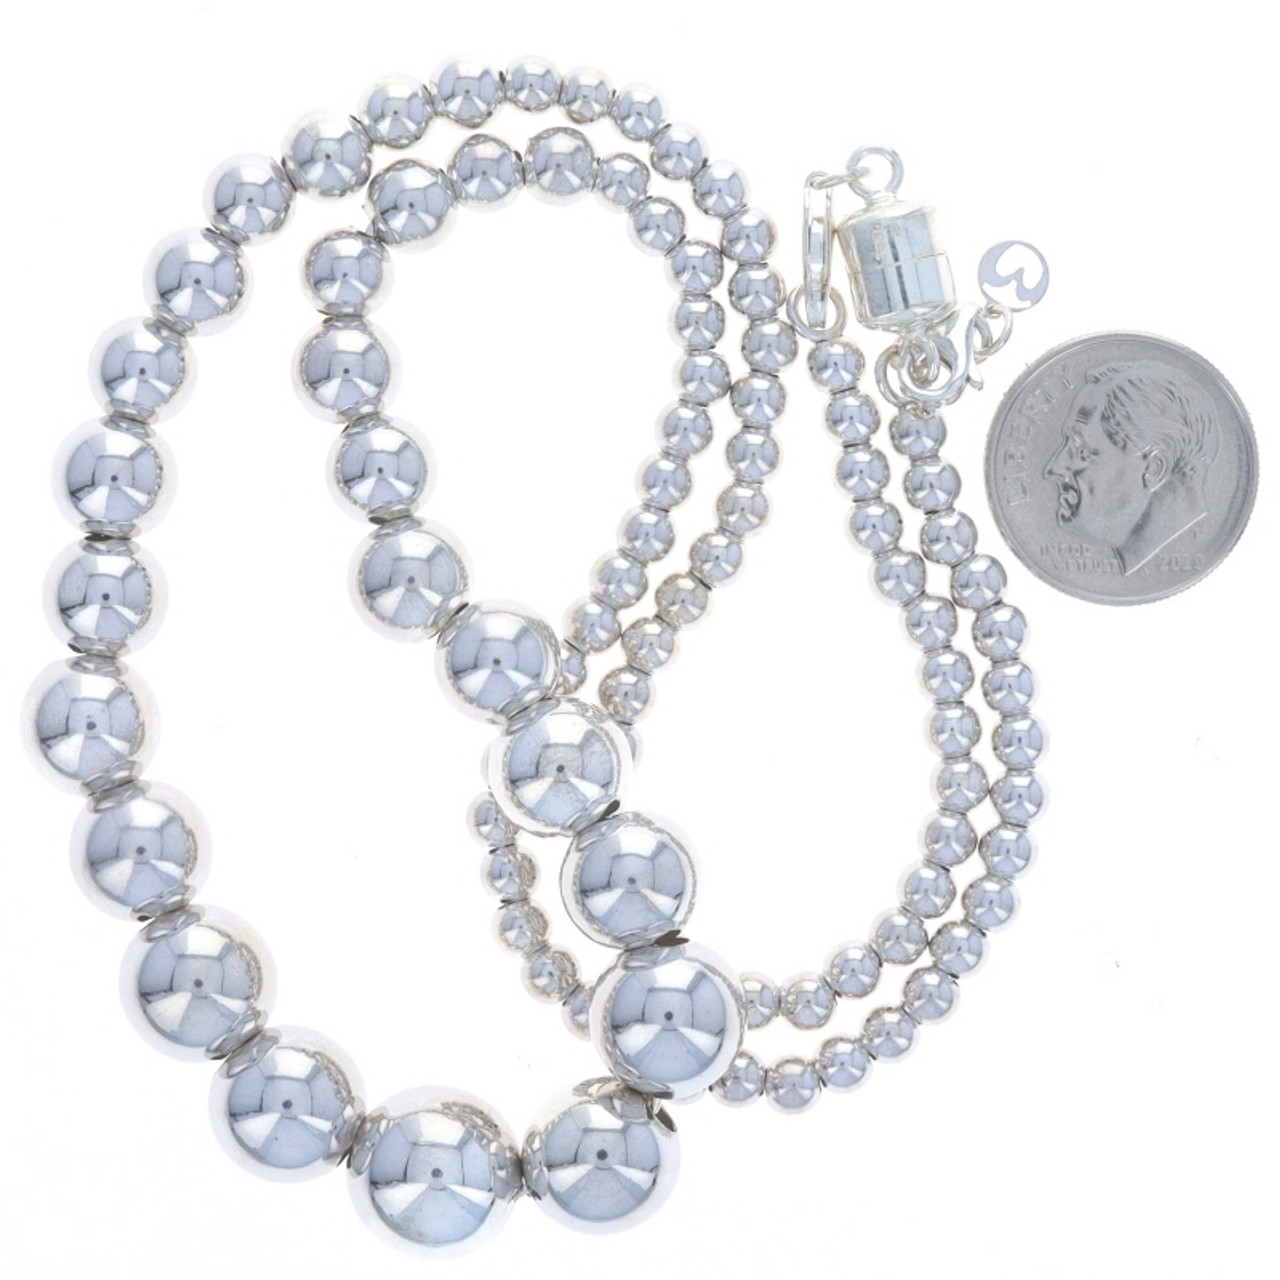 Genuine Pearl Necklace with Crystal Ball Magnetic Clasp